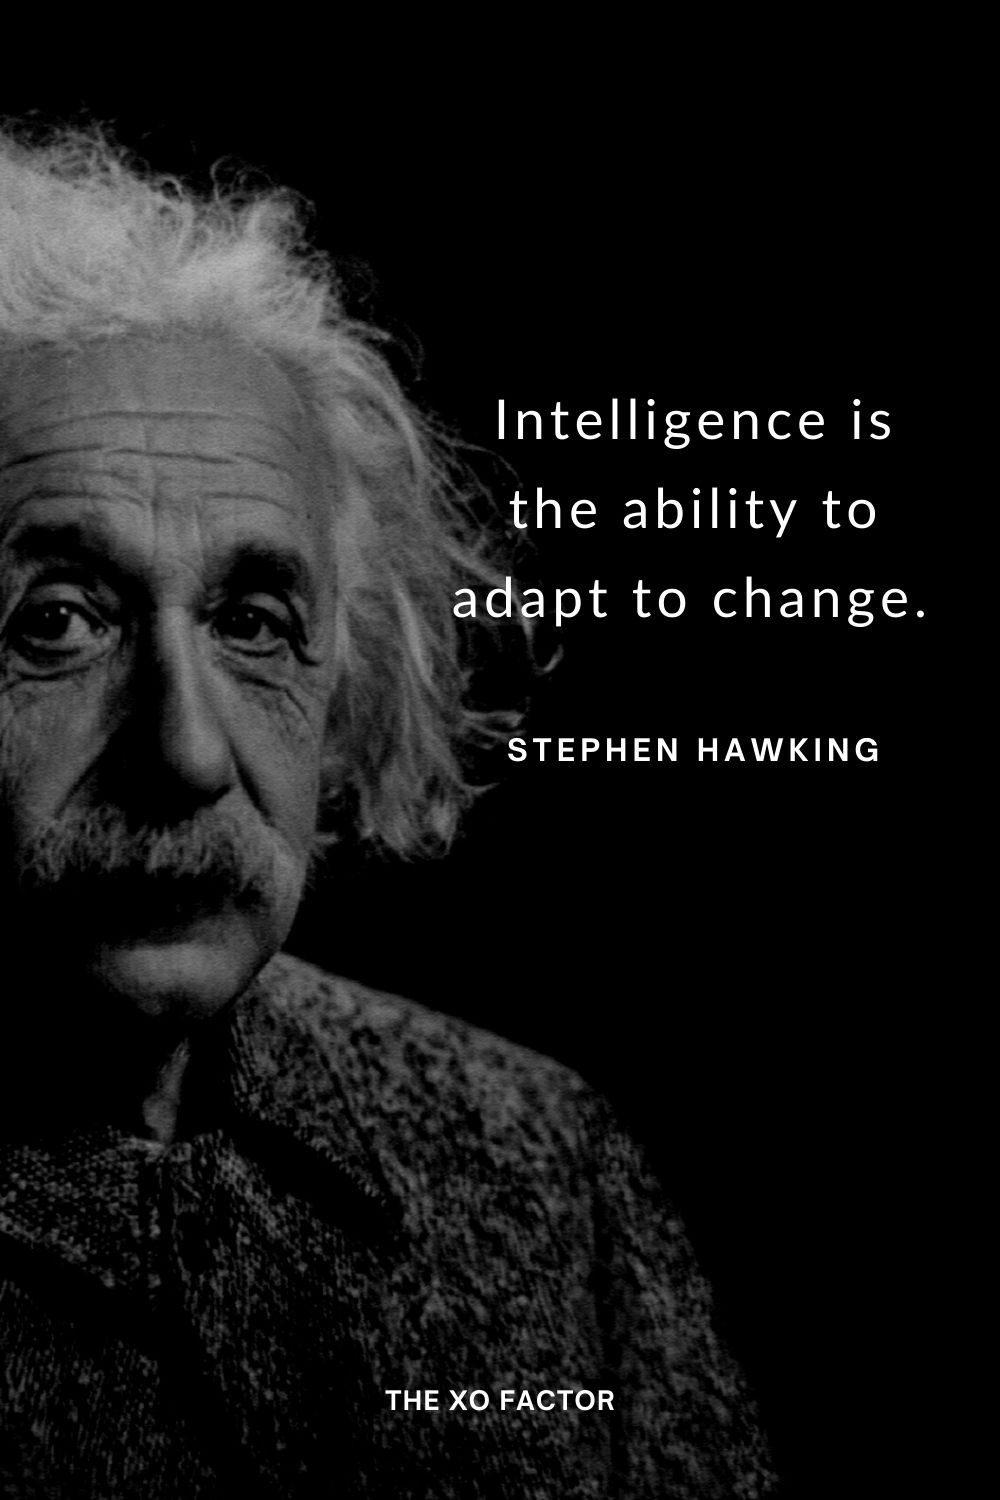 Intelligence is the ability to adapt to change. Stephen Hawking